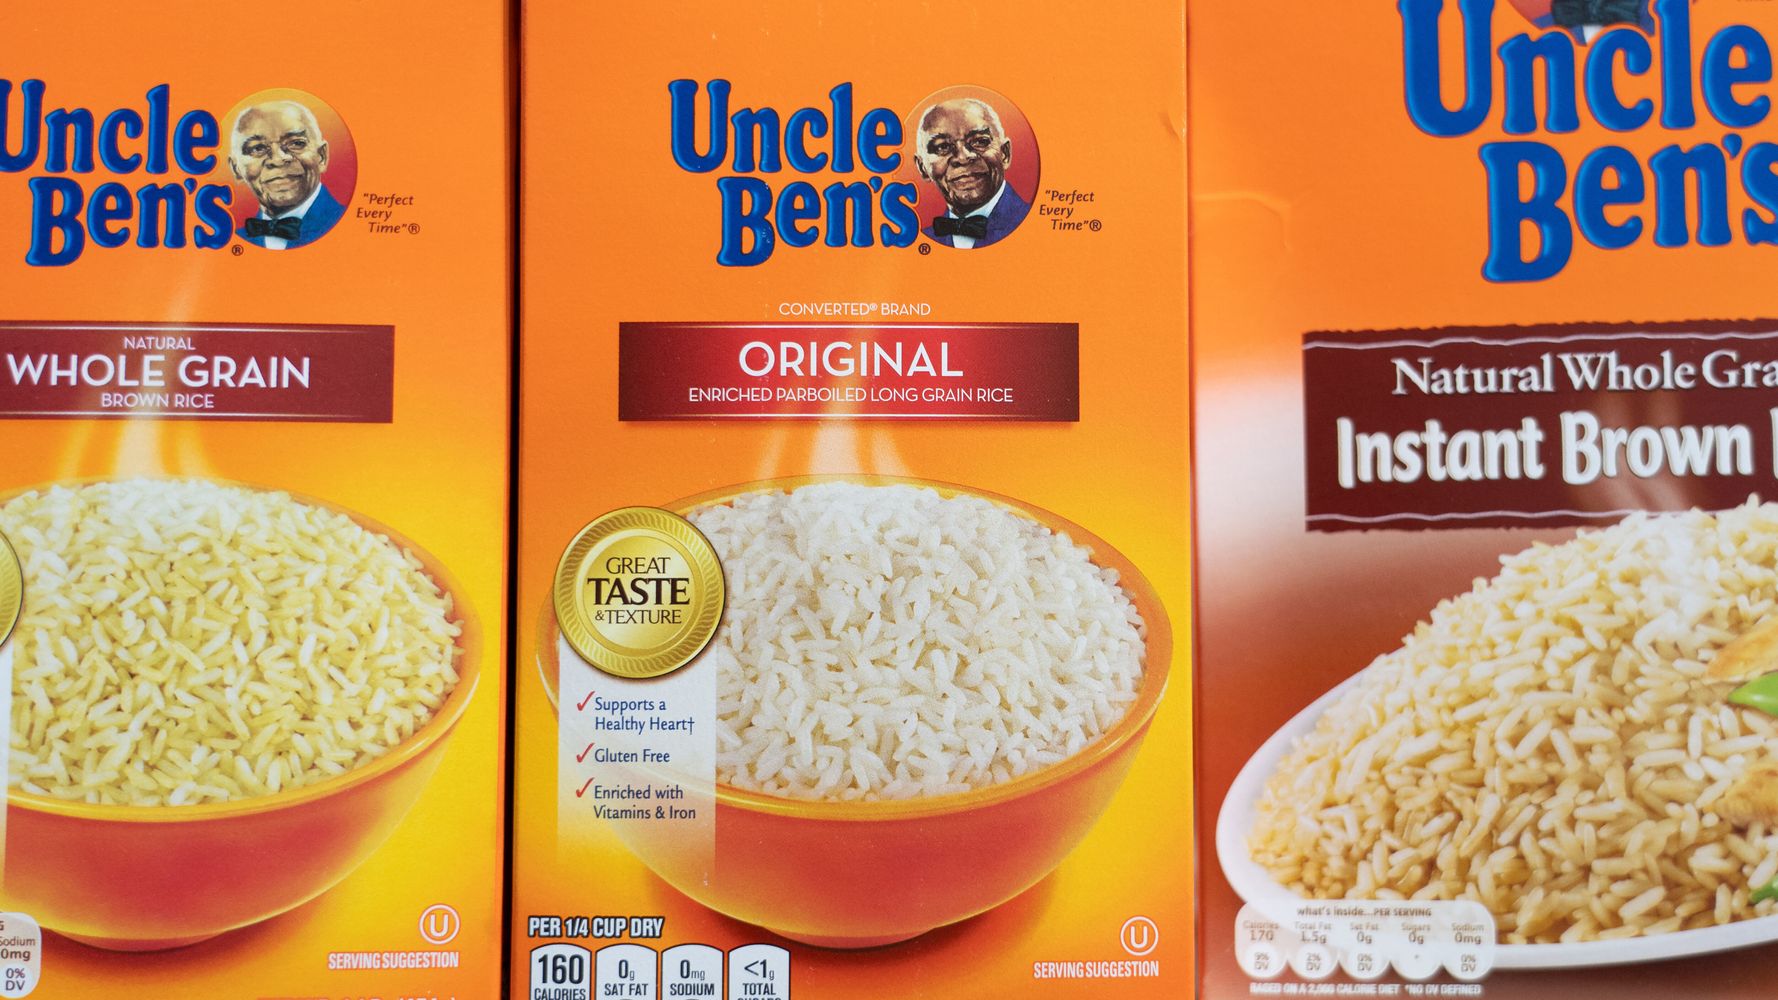 Mars gives Uncle Ben's new brand name amid racial stereotyping